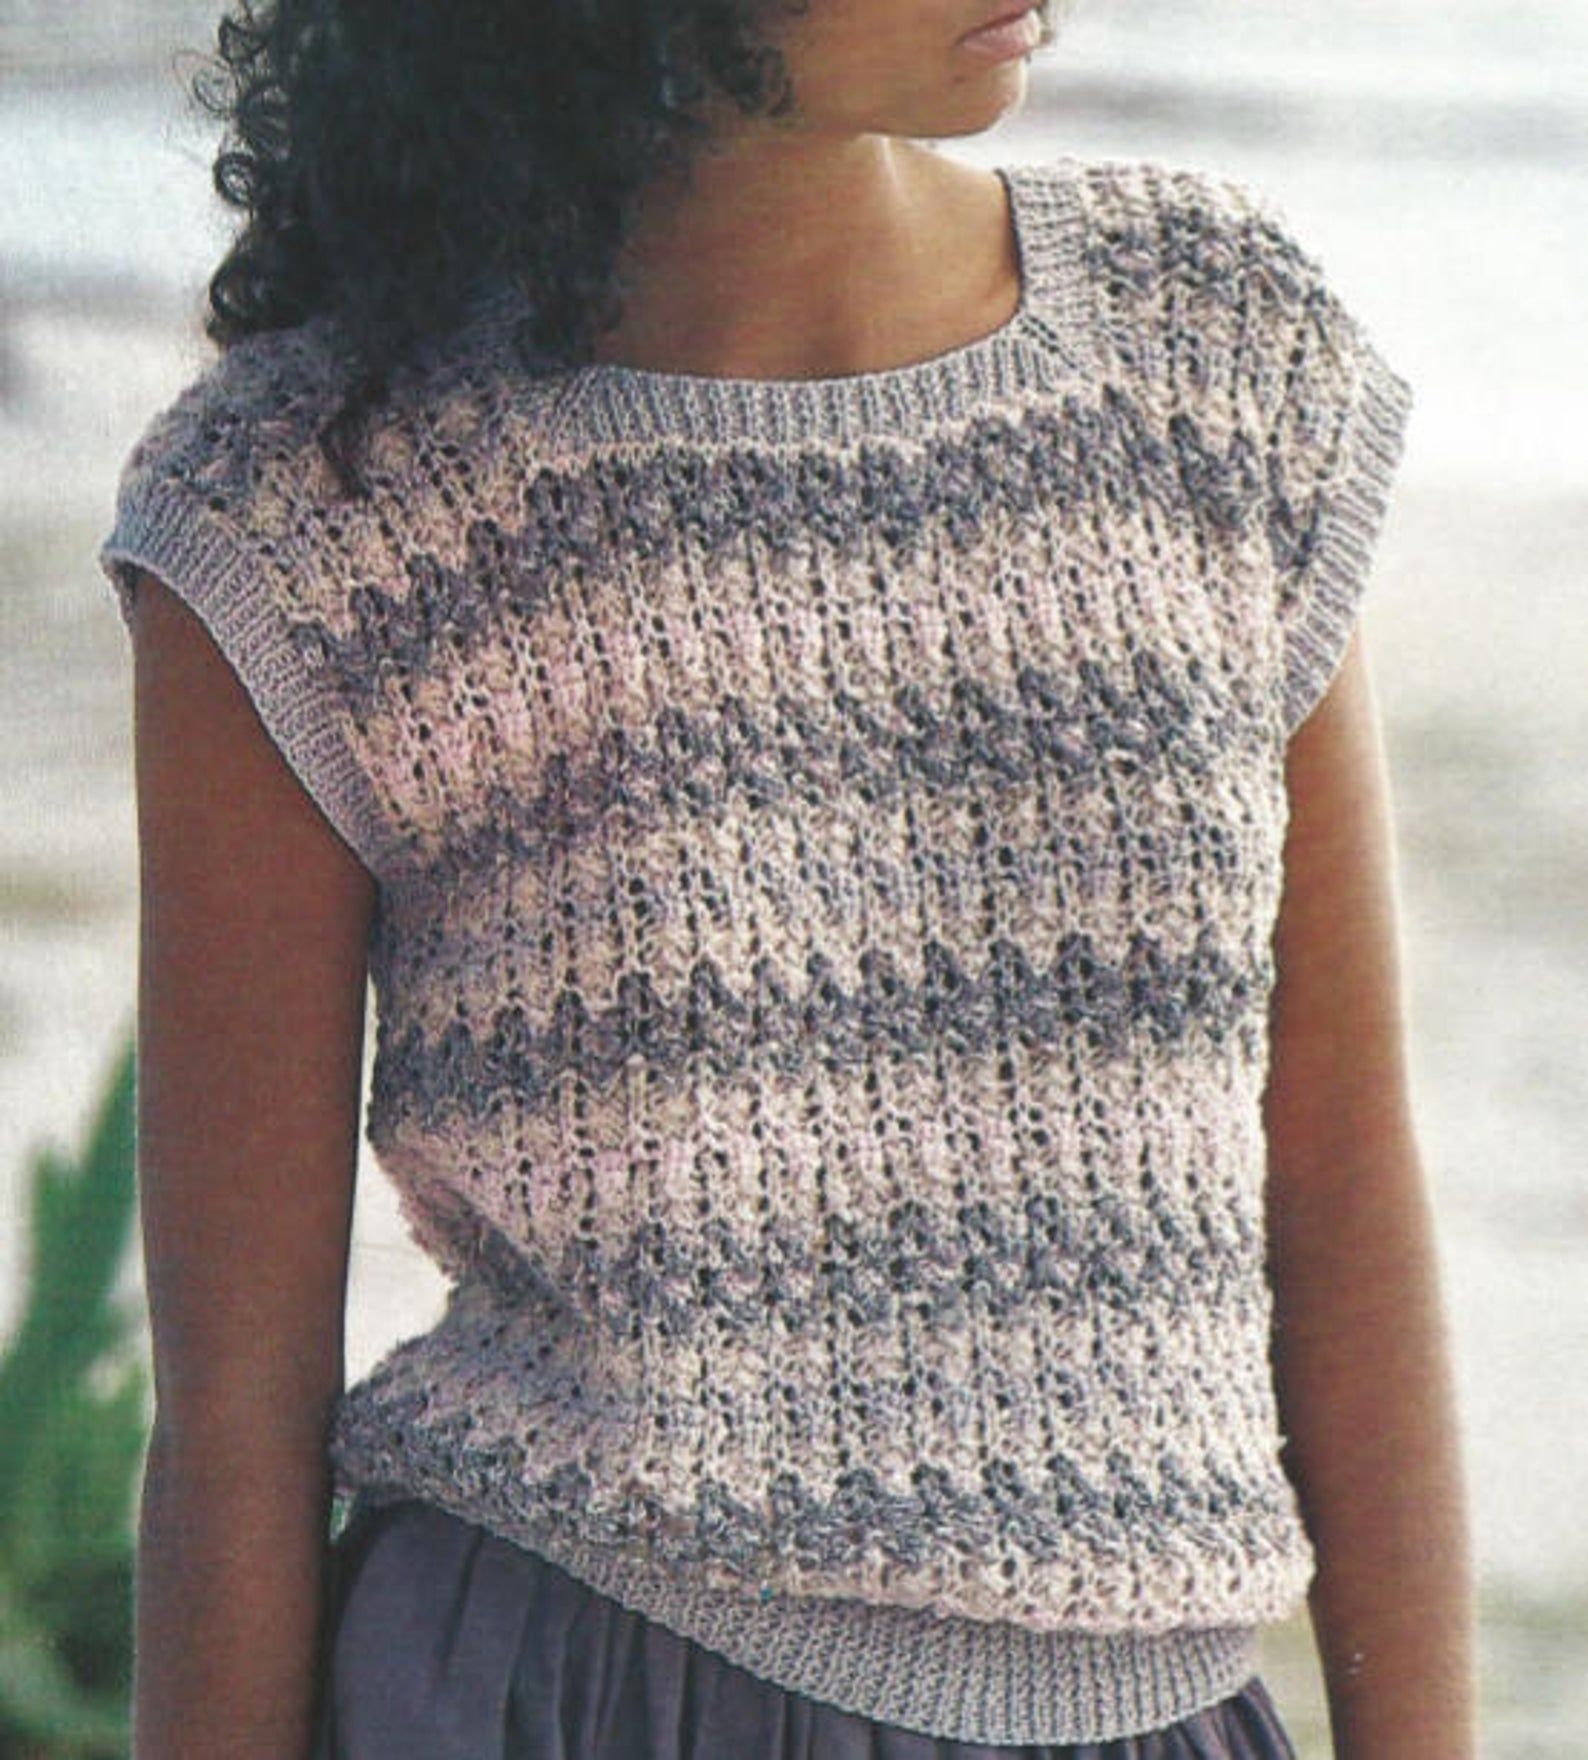 Knit Womans Sleeveless Cotton Top Sweater Pdf /ohhhmama/ - Etsy